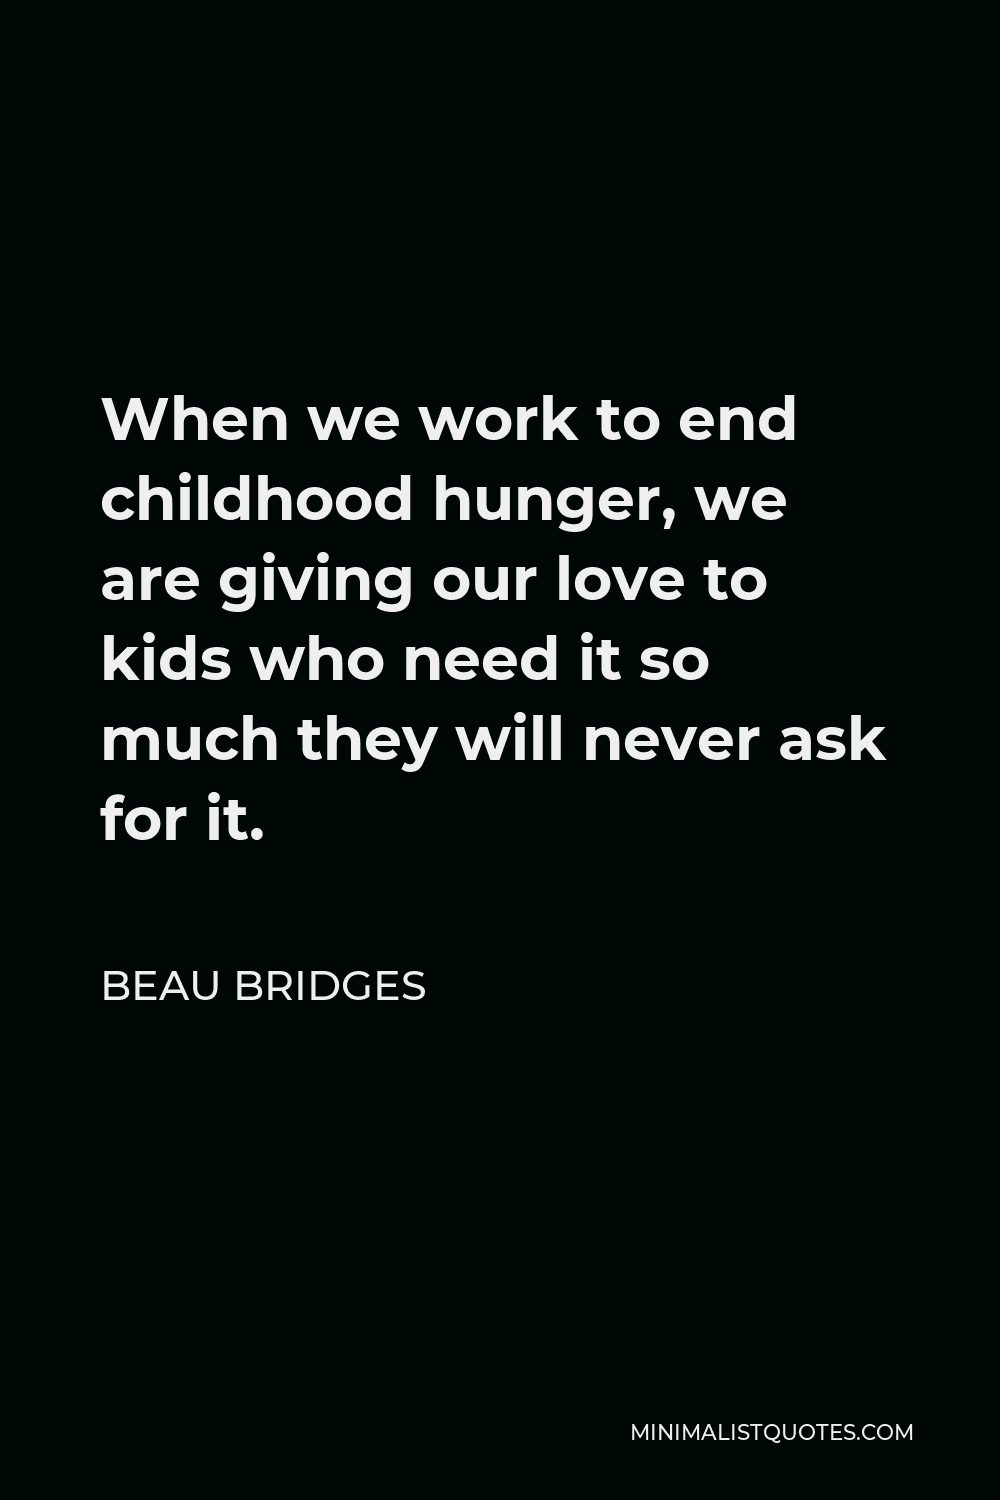 Beau Bridges Quote - When we work to end childhood hunger, we are giving our love to kids who need it so much they will never ask for it.